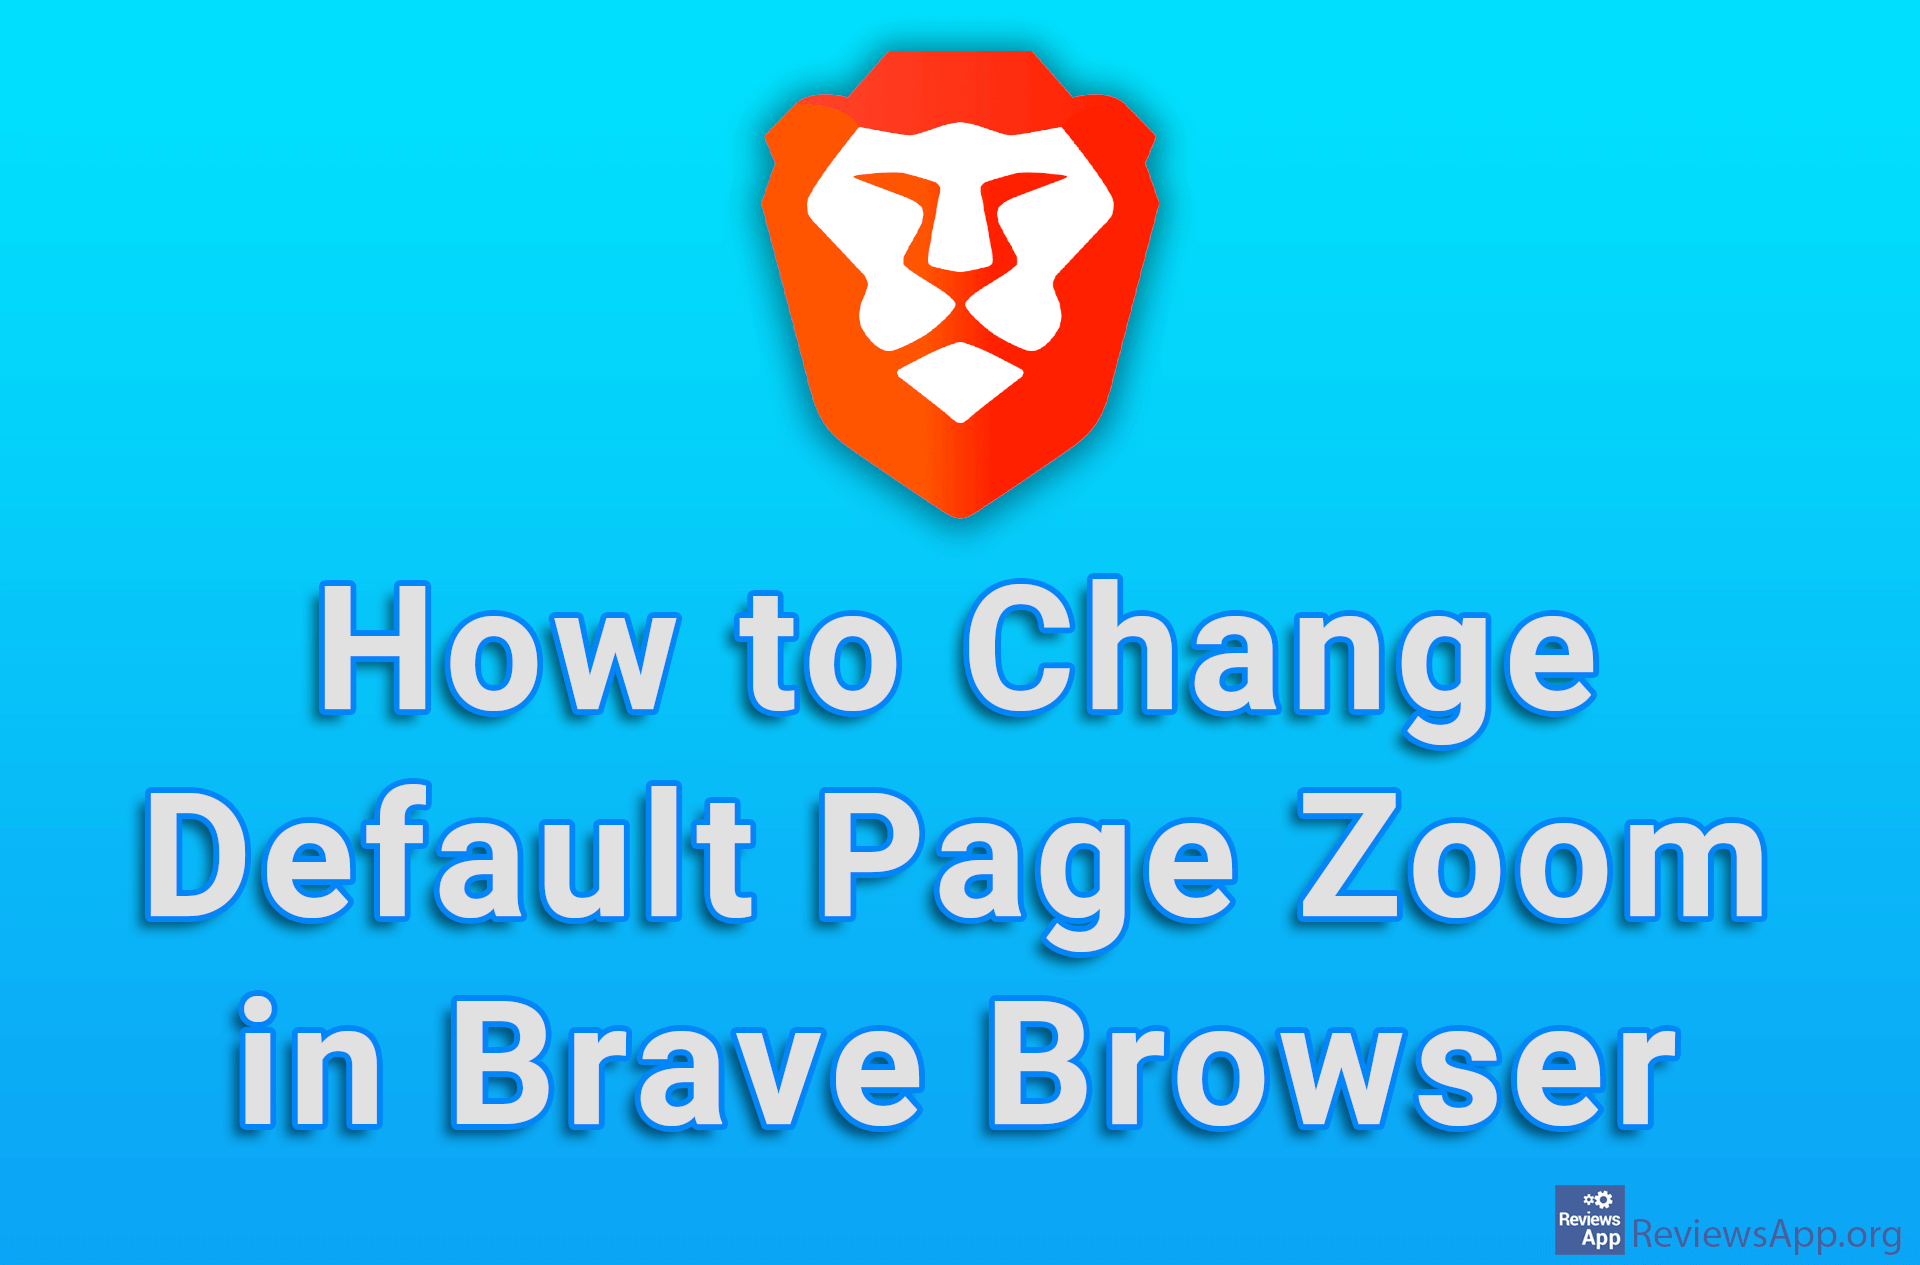 How to Change Default Page Zoom in Brave Browser